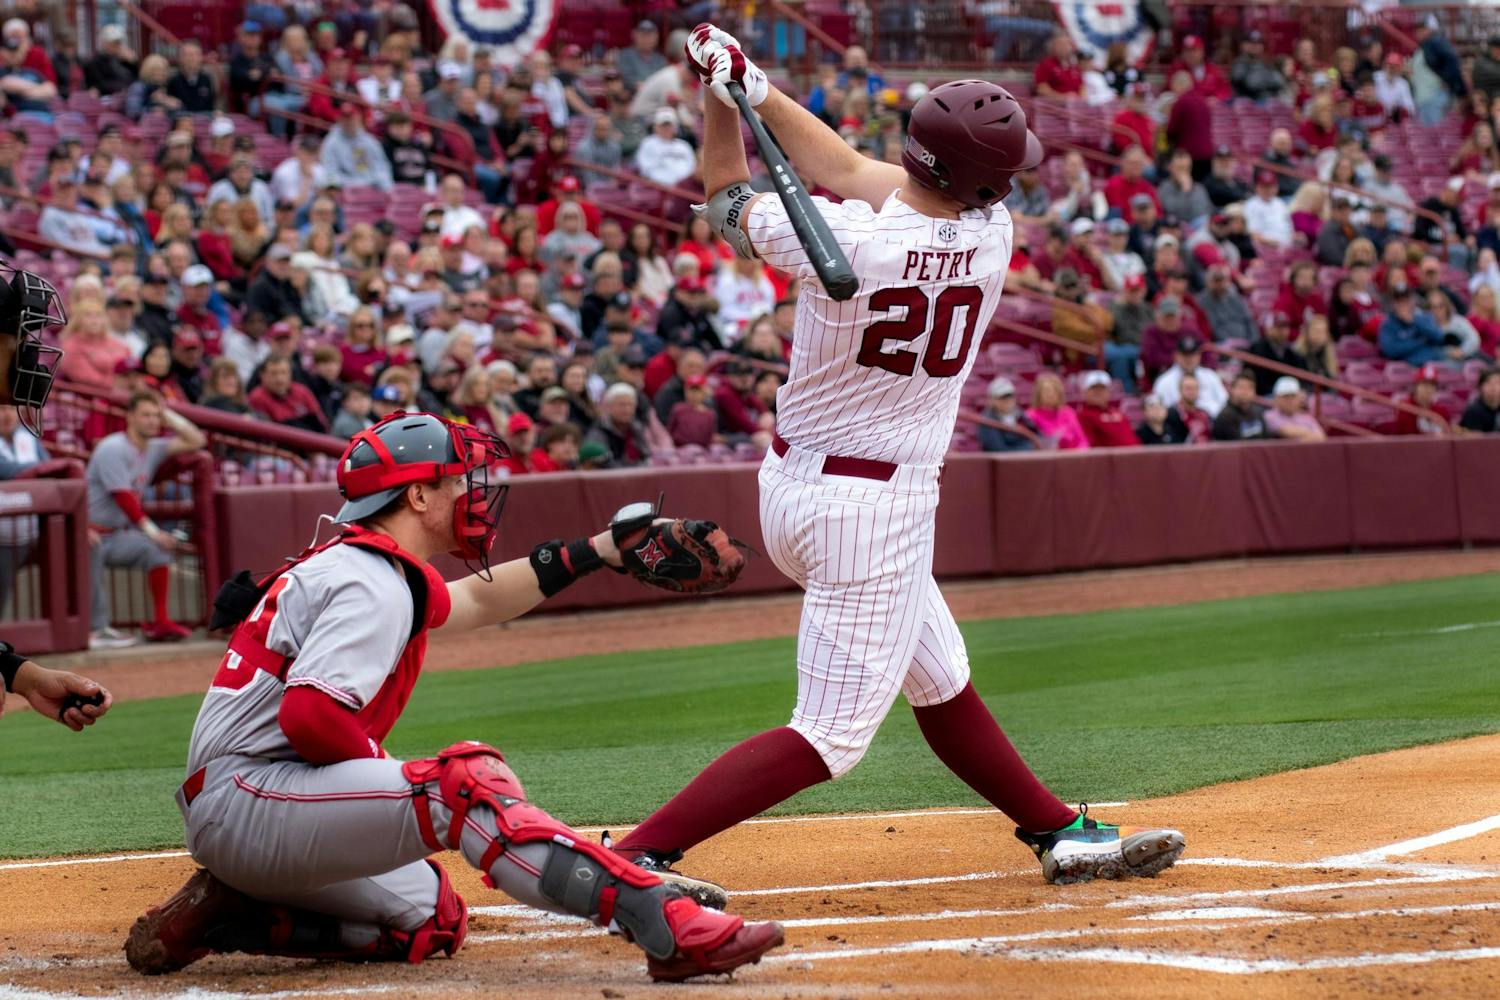 The South Carolina baseball team swept its opening series against Miami-Ohio on Feb. 16, 17 and 18, 2024, at Founders Park. The Gamecocks started the weekend with a 5-1 victory, followed by high scoring wins of 11-4 and 14-0. The team is ranked No. 25 in the nation.